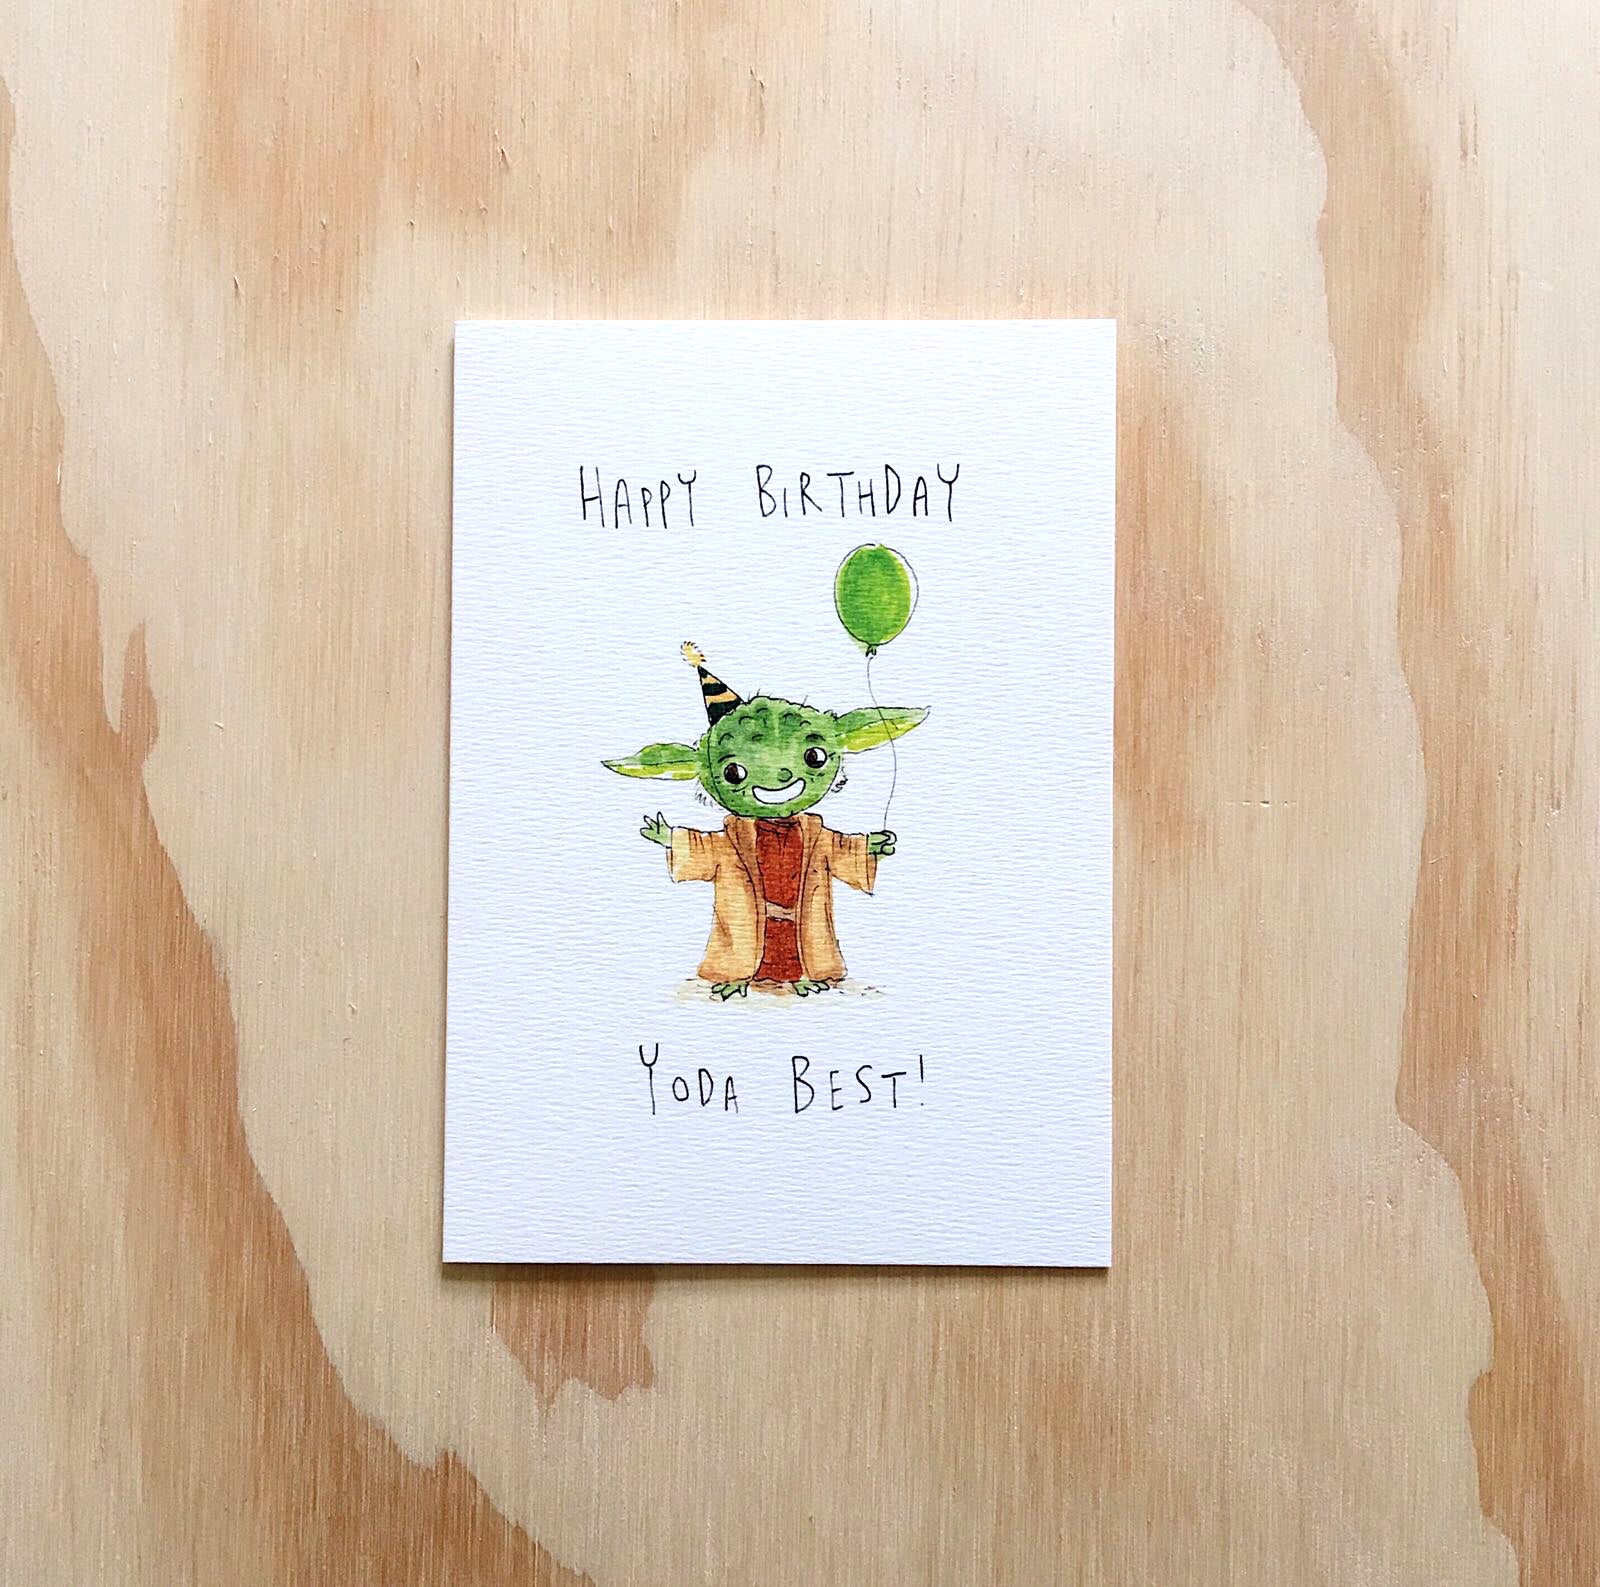 Happy Birthday, Yoda Best! | Greeting Cards | Unique Hand-made card |